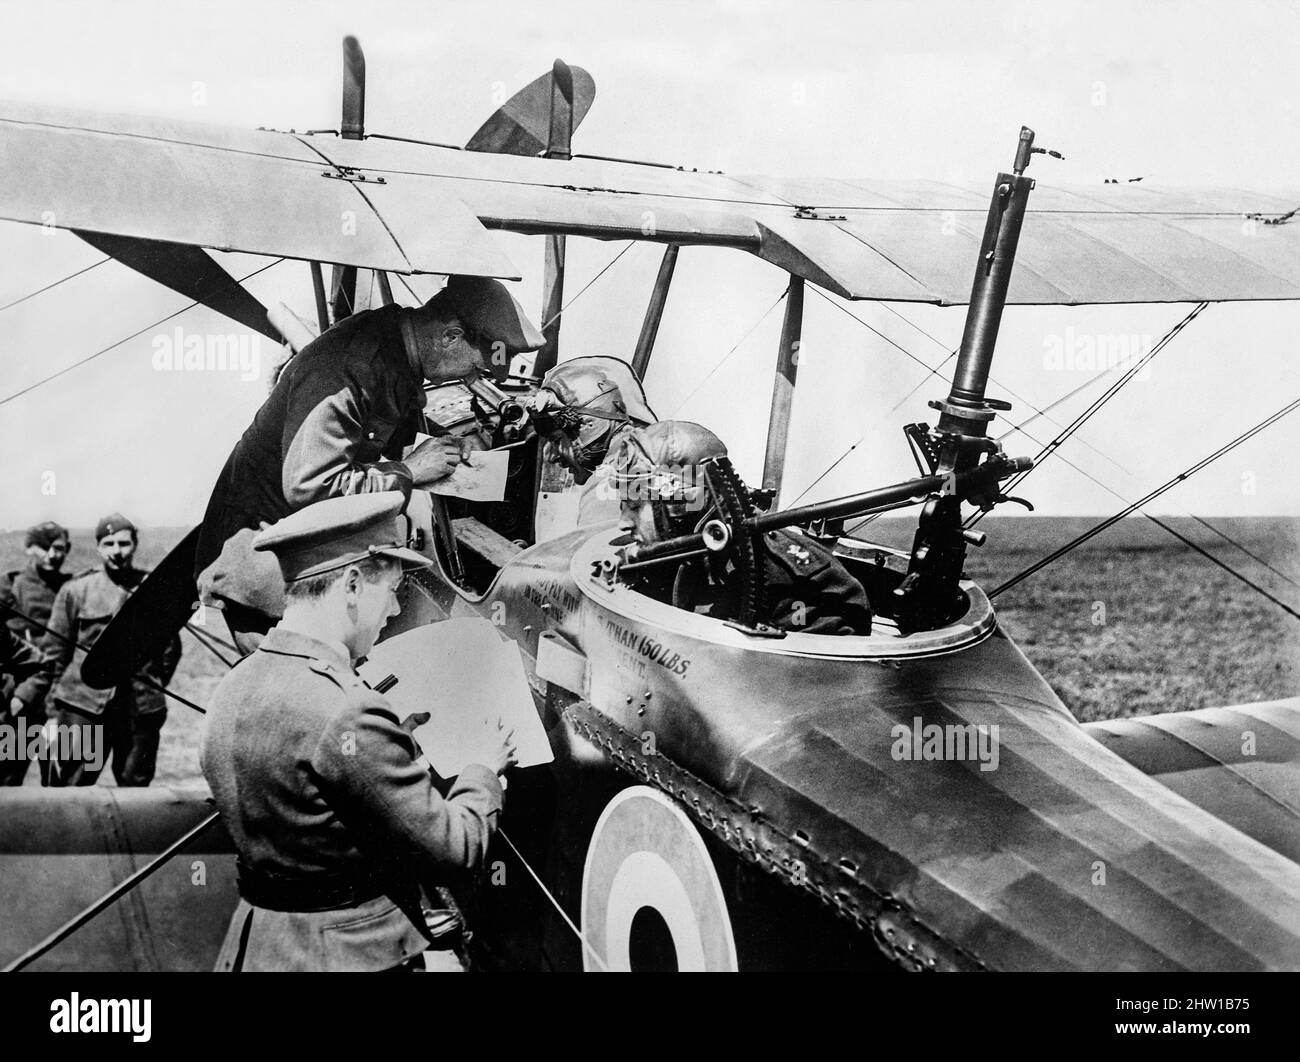 An early 20th century photograph of the the pilot and observer of a Royal Aircraft Factory R.E.8 biplane of No. 59 Squadron receiving instructions from Major Charles Jospeh Mackay before taking off from the Vert-Galland Aerodrome, France, May 15, 1918. Stock Photo